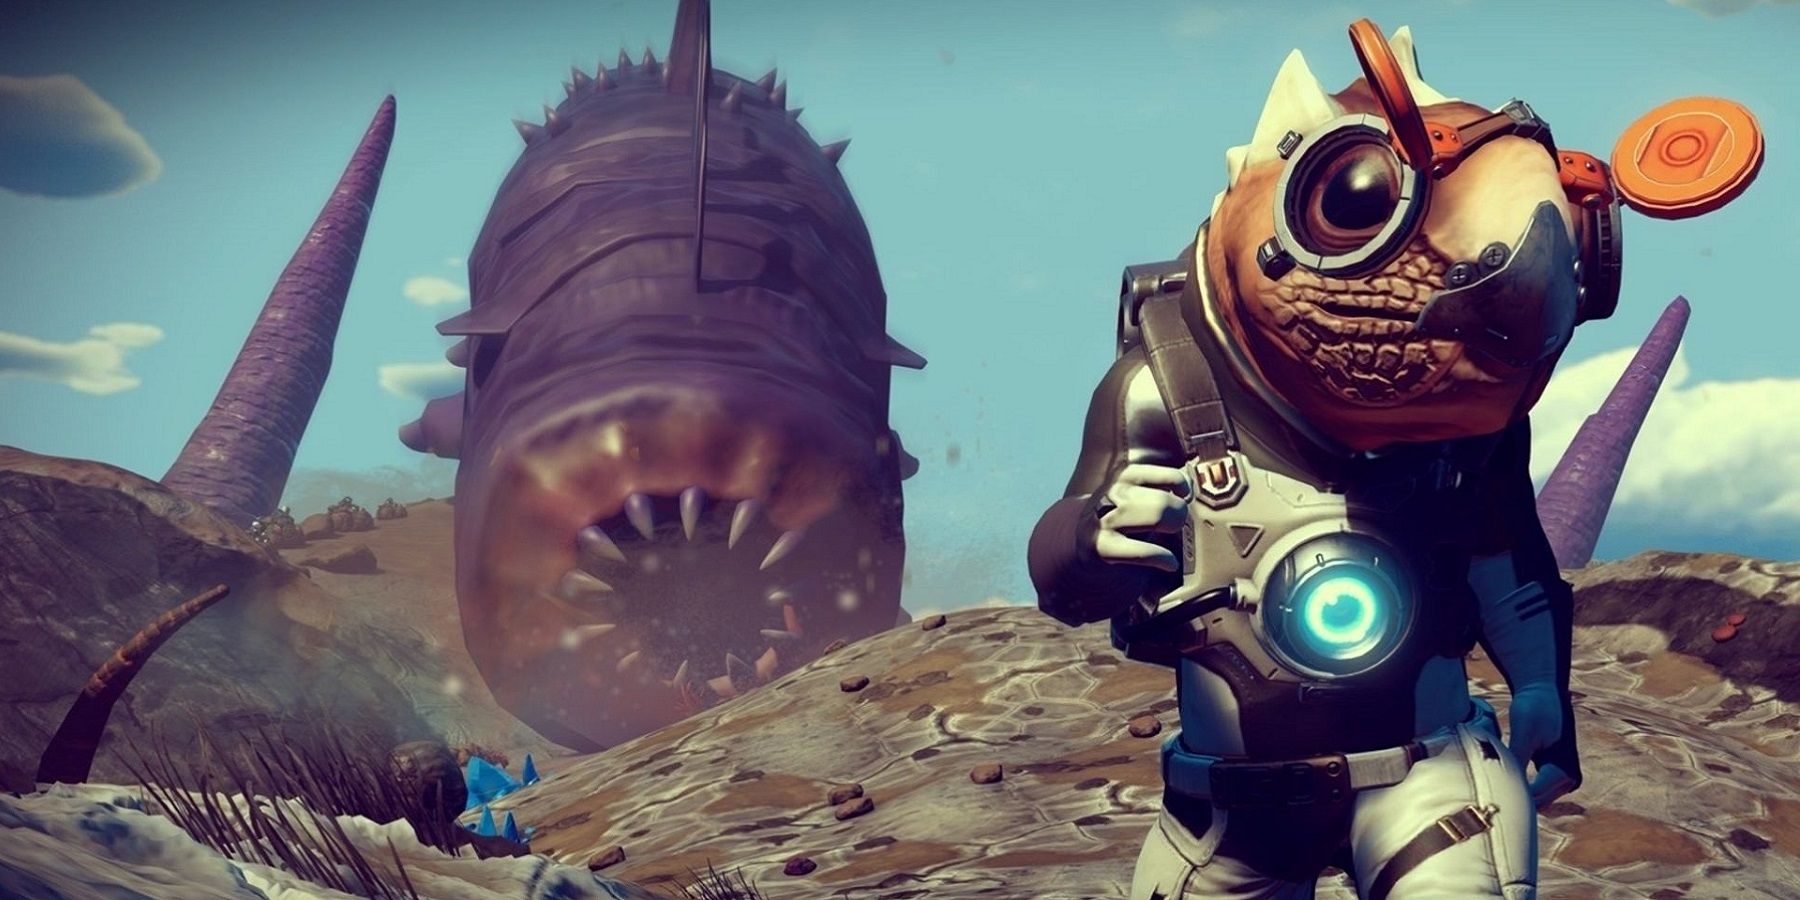 Image from No Man's Sky showing a Gek traveler with a giant sandworm behind them.